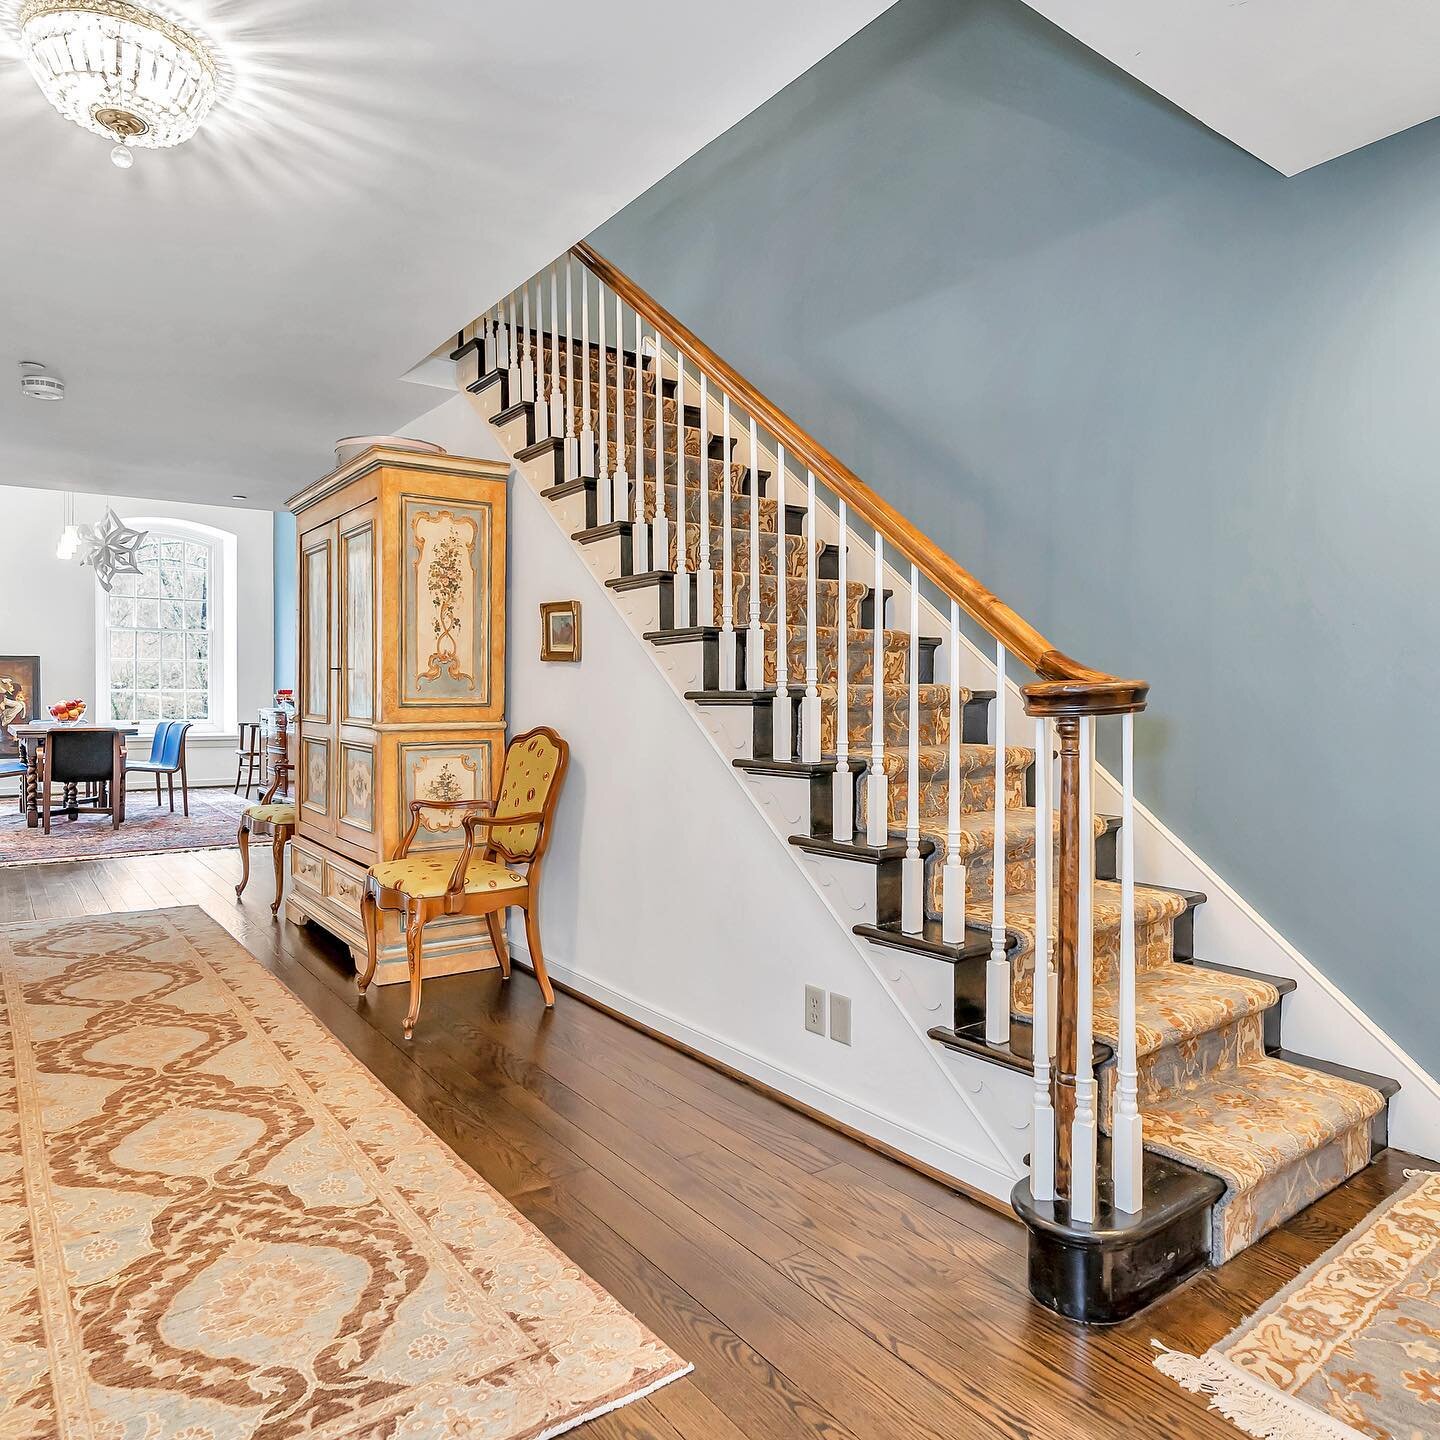 Experience the pinnacle of luxurious living at Rockland Mills, where the serene Brandywine River meets sophistication. This magnificent 3-story townhome with its own elevator, boasts over 3,300 SF of living space and stunning architectural details. R